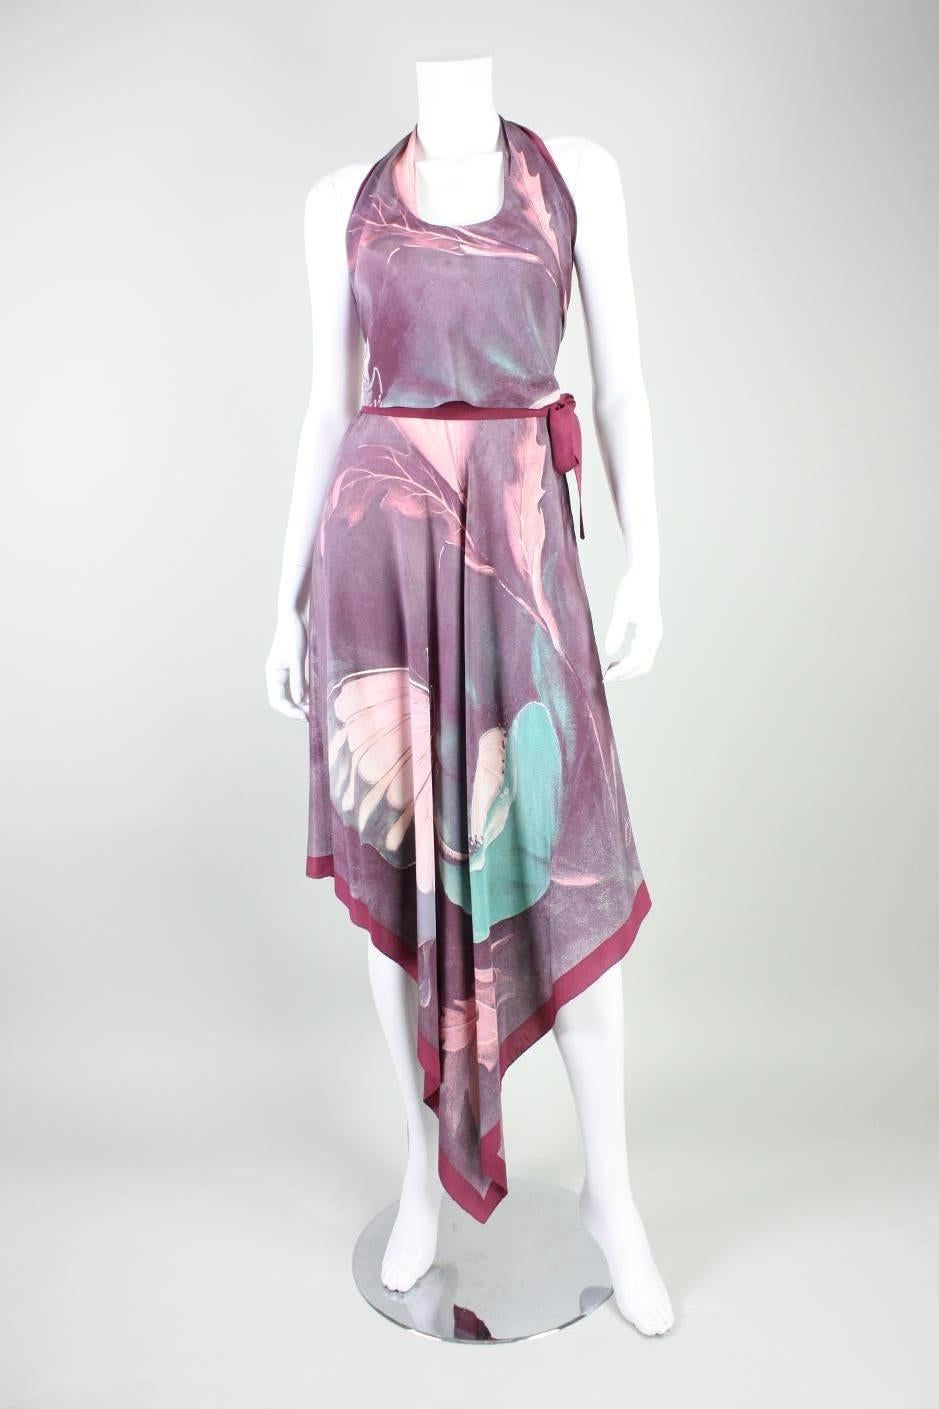 Vintage ensemble dates to the 1970's and is made of mauve silk with a butterfly and leaf print that was designed by R. Meciani.  Halter top ties at back neck and back waist.  Skirt features handkerchief hem and ties at side waist.  Both pieces are